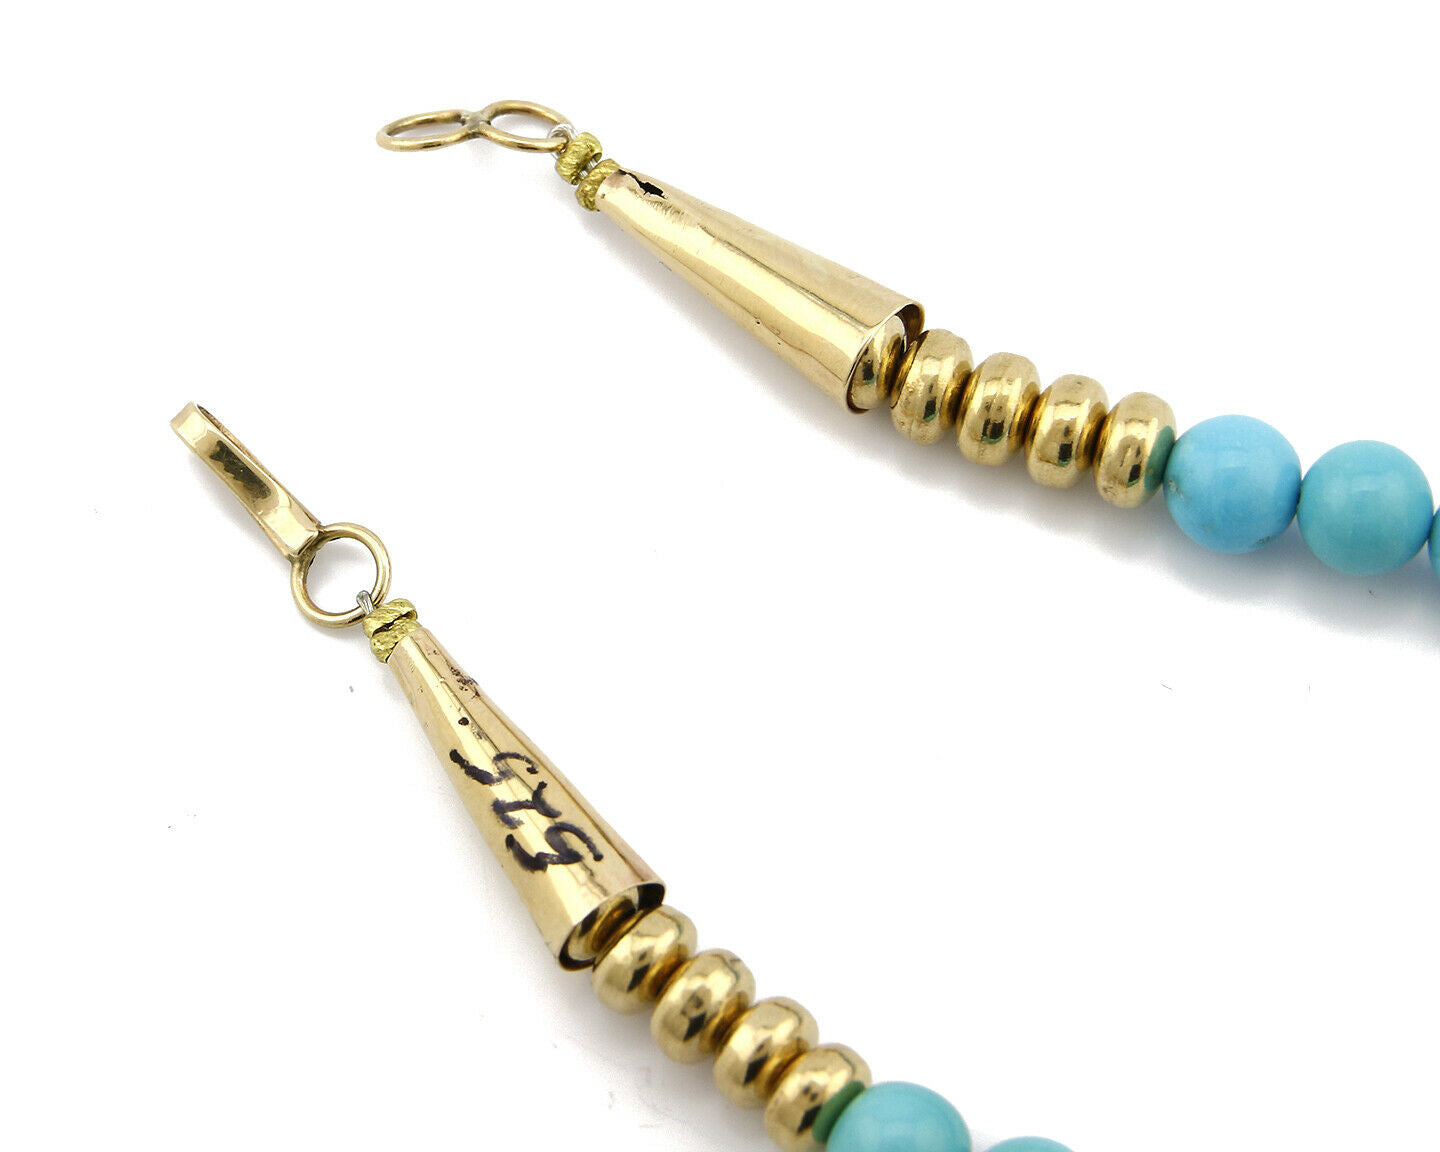 Natural Mined Opal & Turquoise 7.0 mm Bead Necklace in 14k Real Yellow Gold